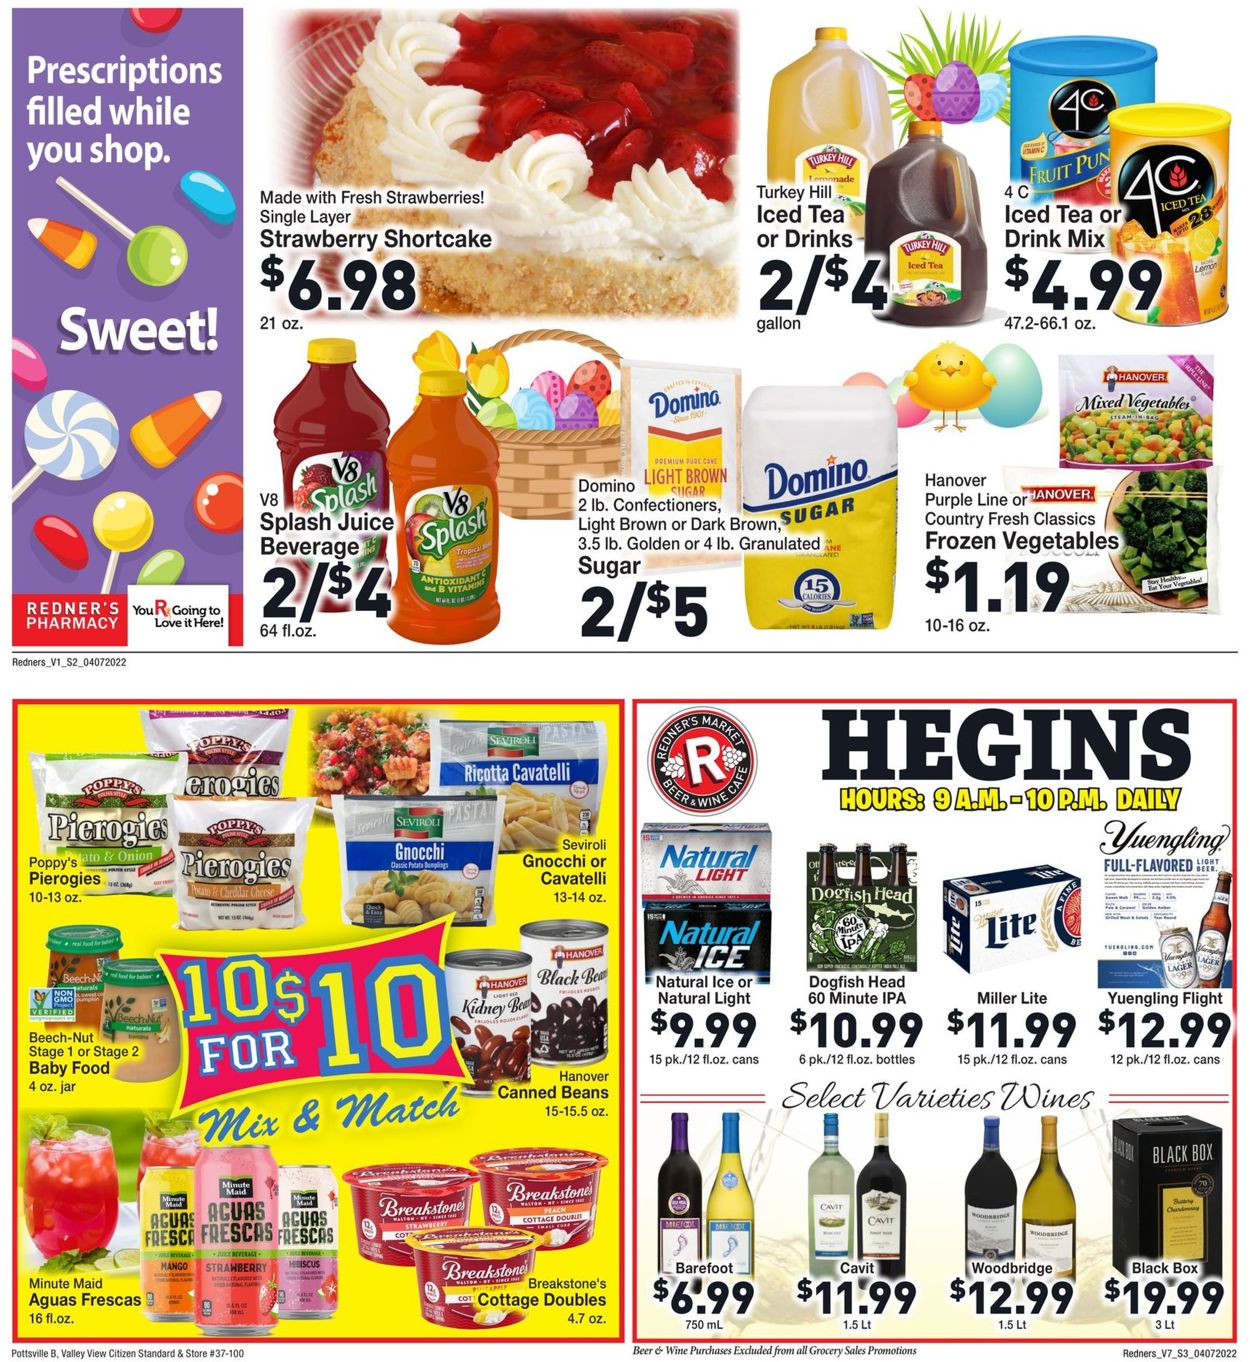 Redner’s Warehouse Market EASTER 2022 Weekly Ad Circular - valid 04/07-04/13/2022 (Page 3)